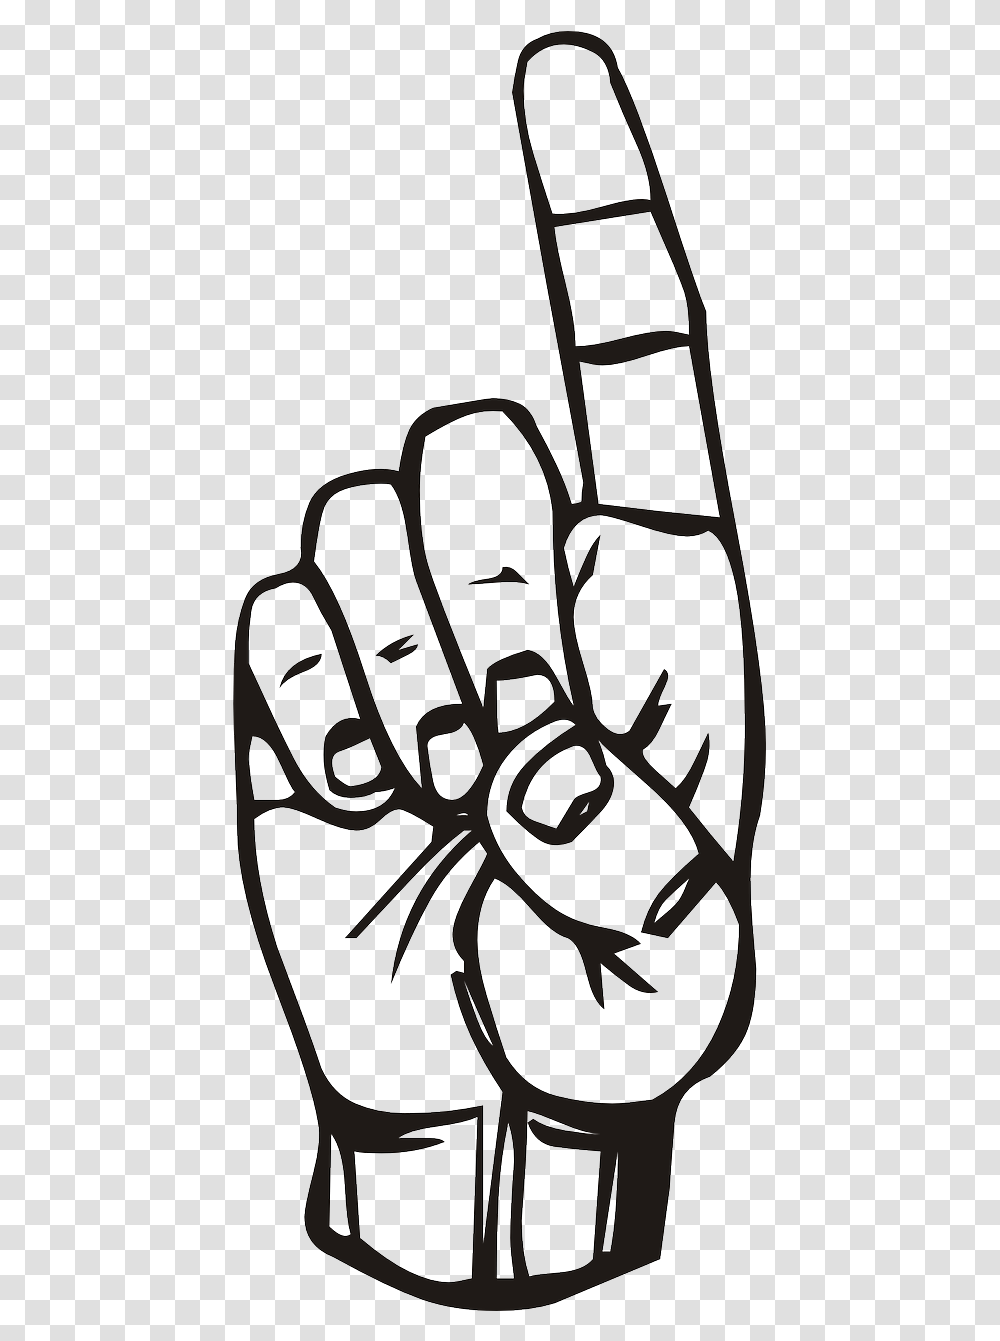 Index Finger Clipart Black And White, Machine, Leisure Activities Transparent Png